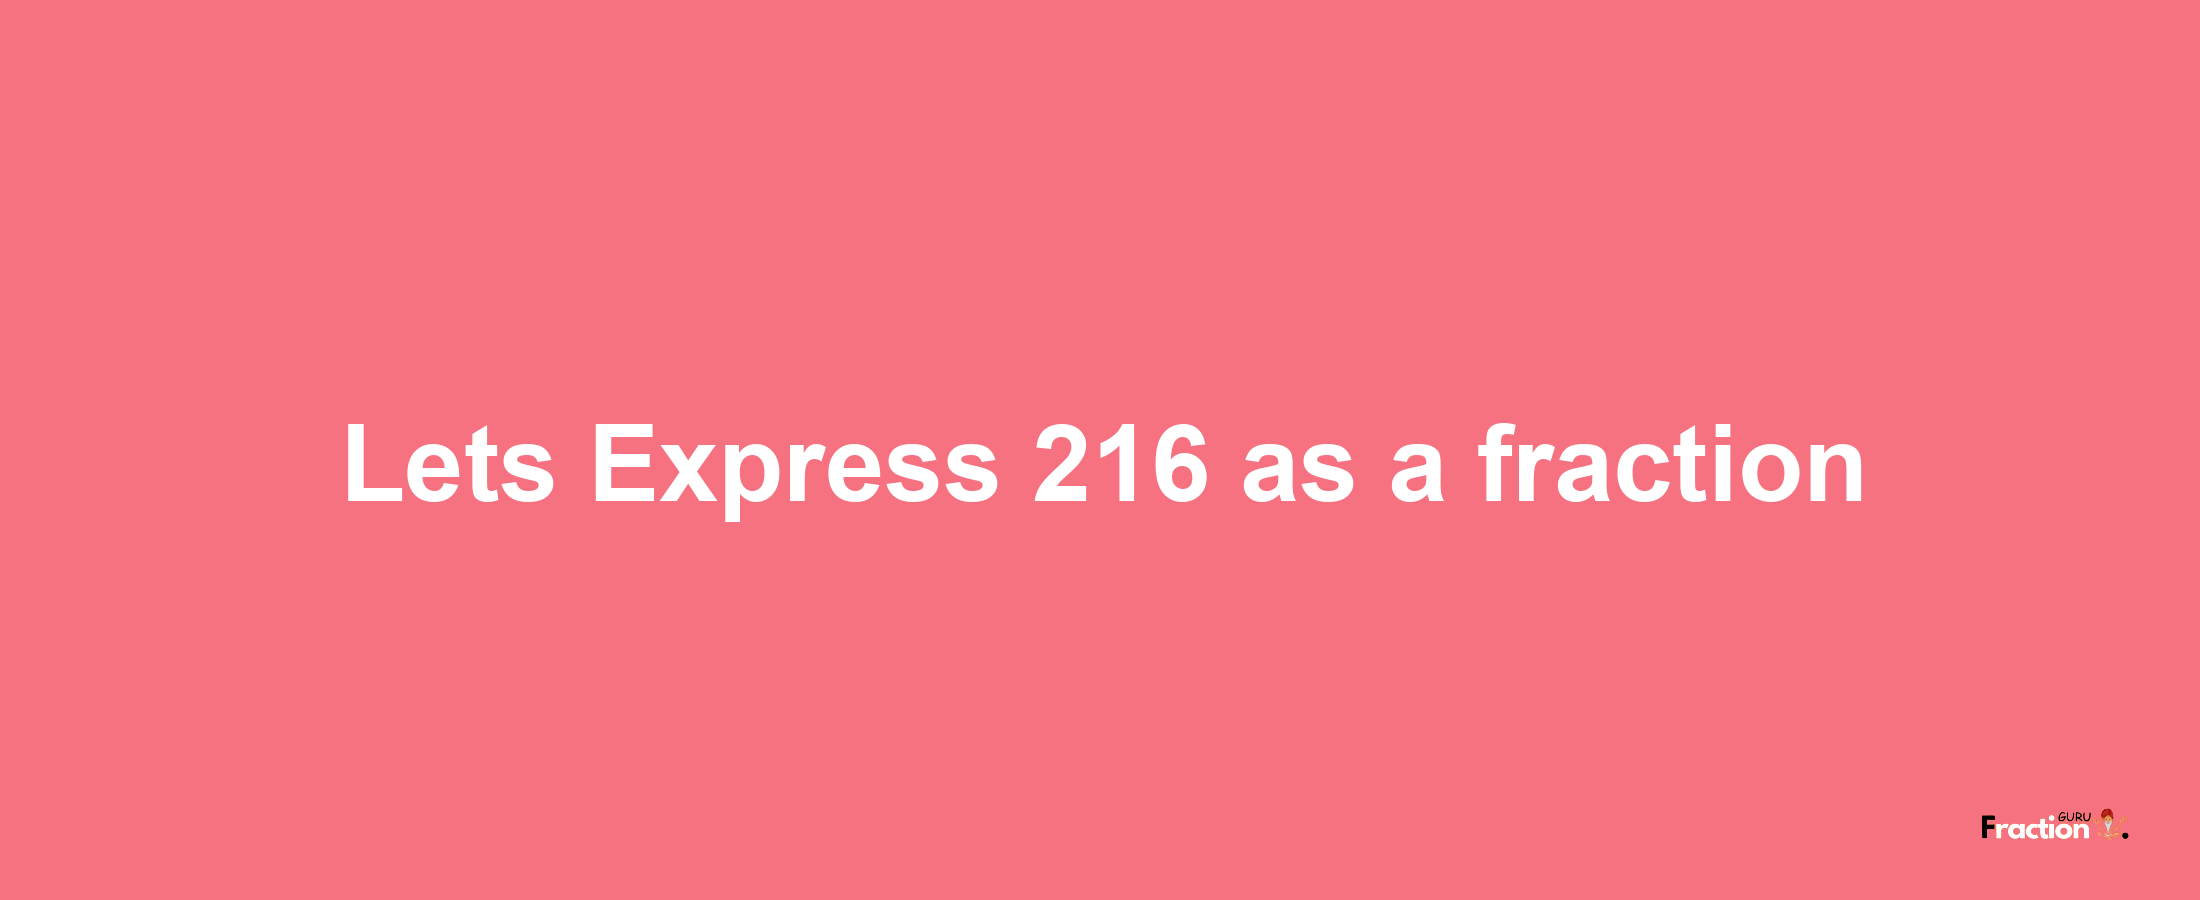 Lets Express 216 as afraction